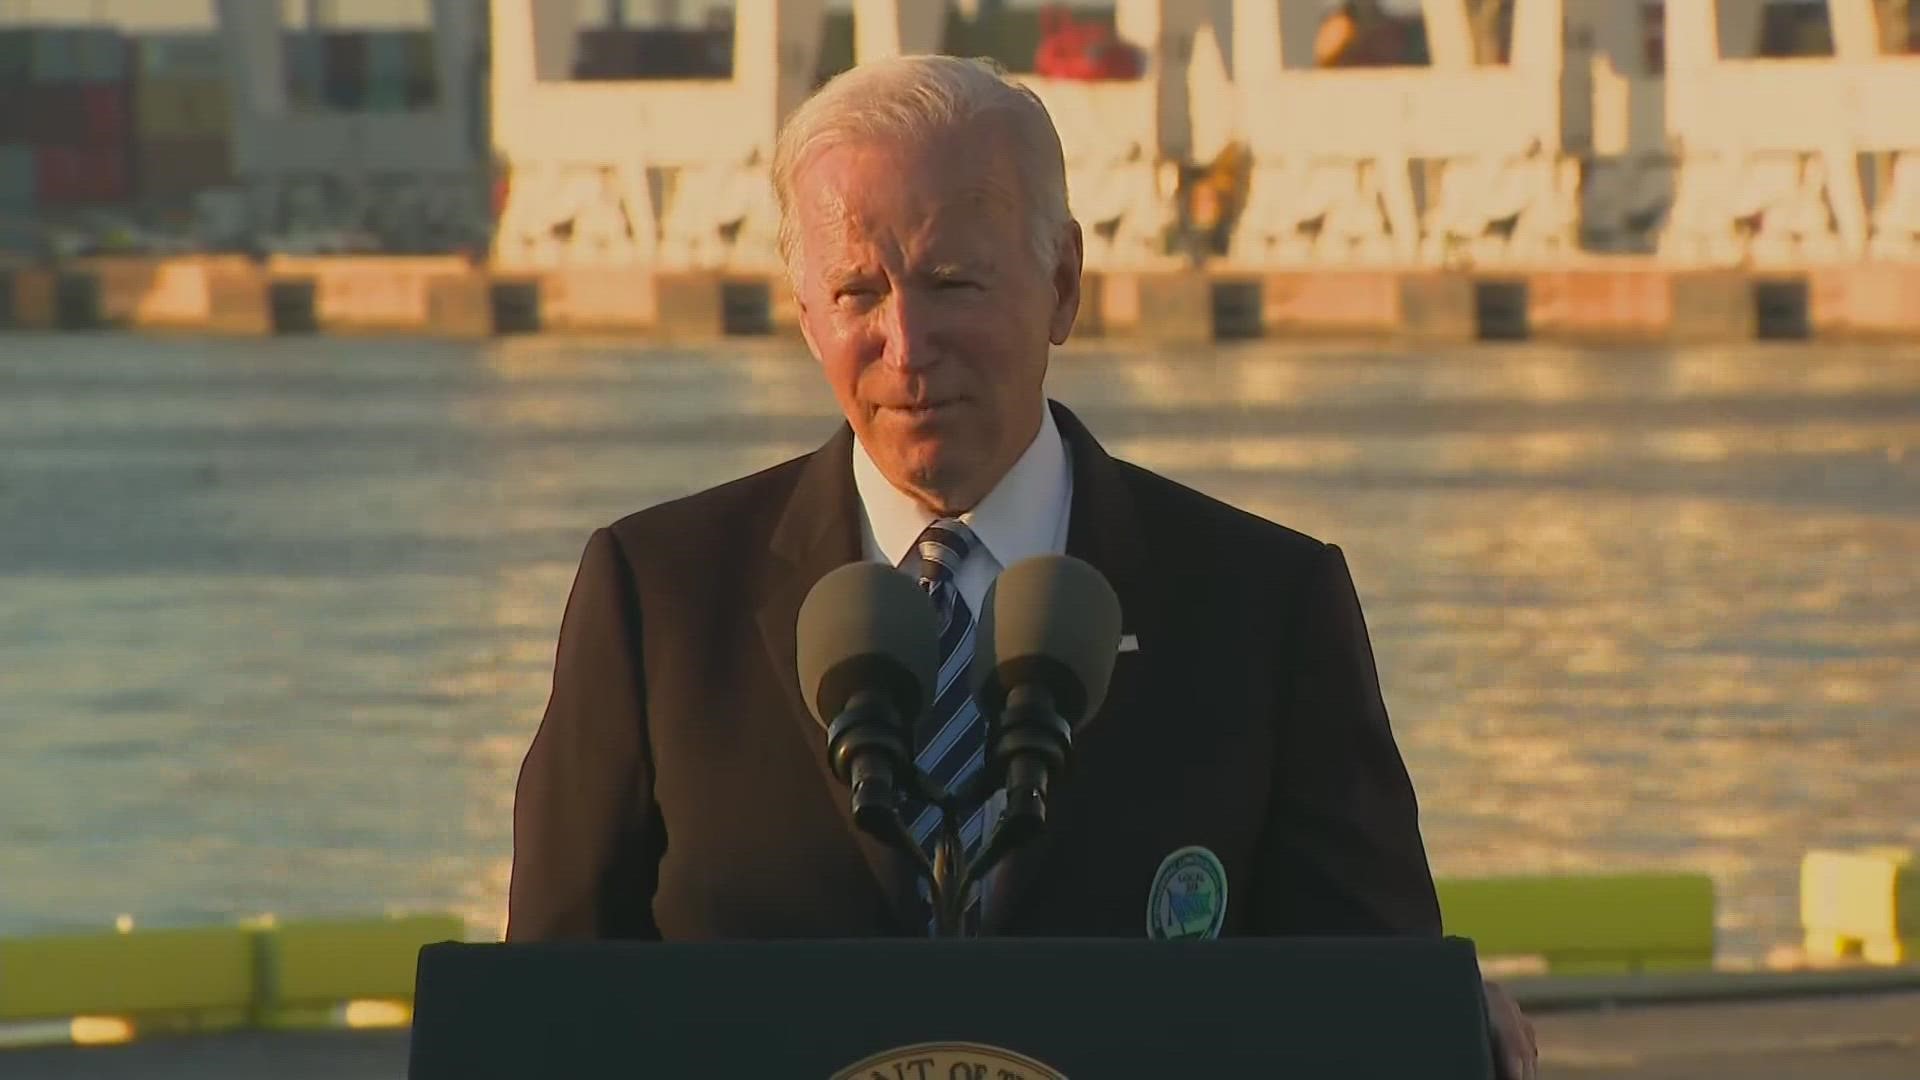 Biden visited Baltimore Wednesday, planning to use the city as an example of how to reduce shipping bottlenecks caused by the pandemic.